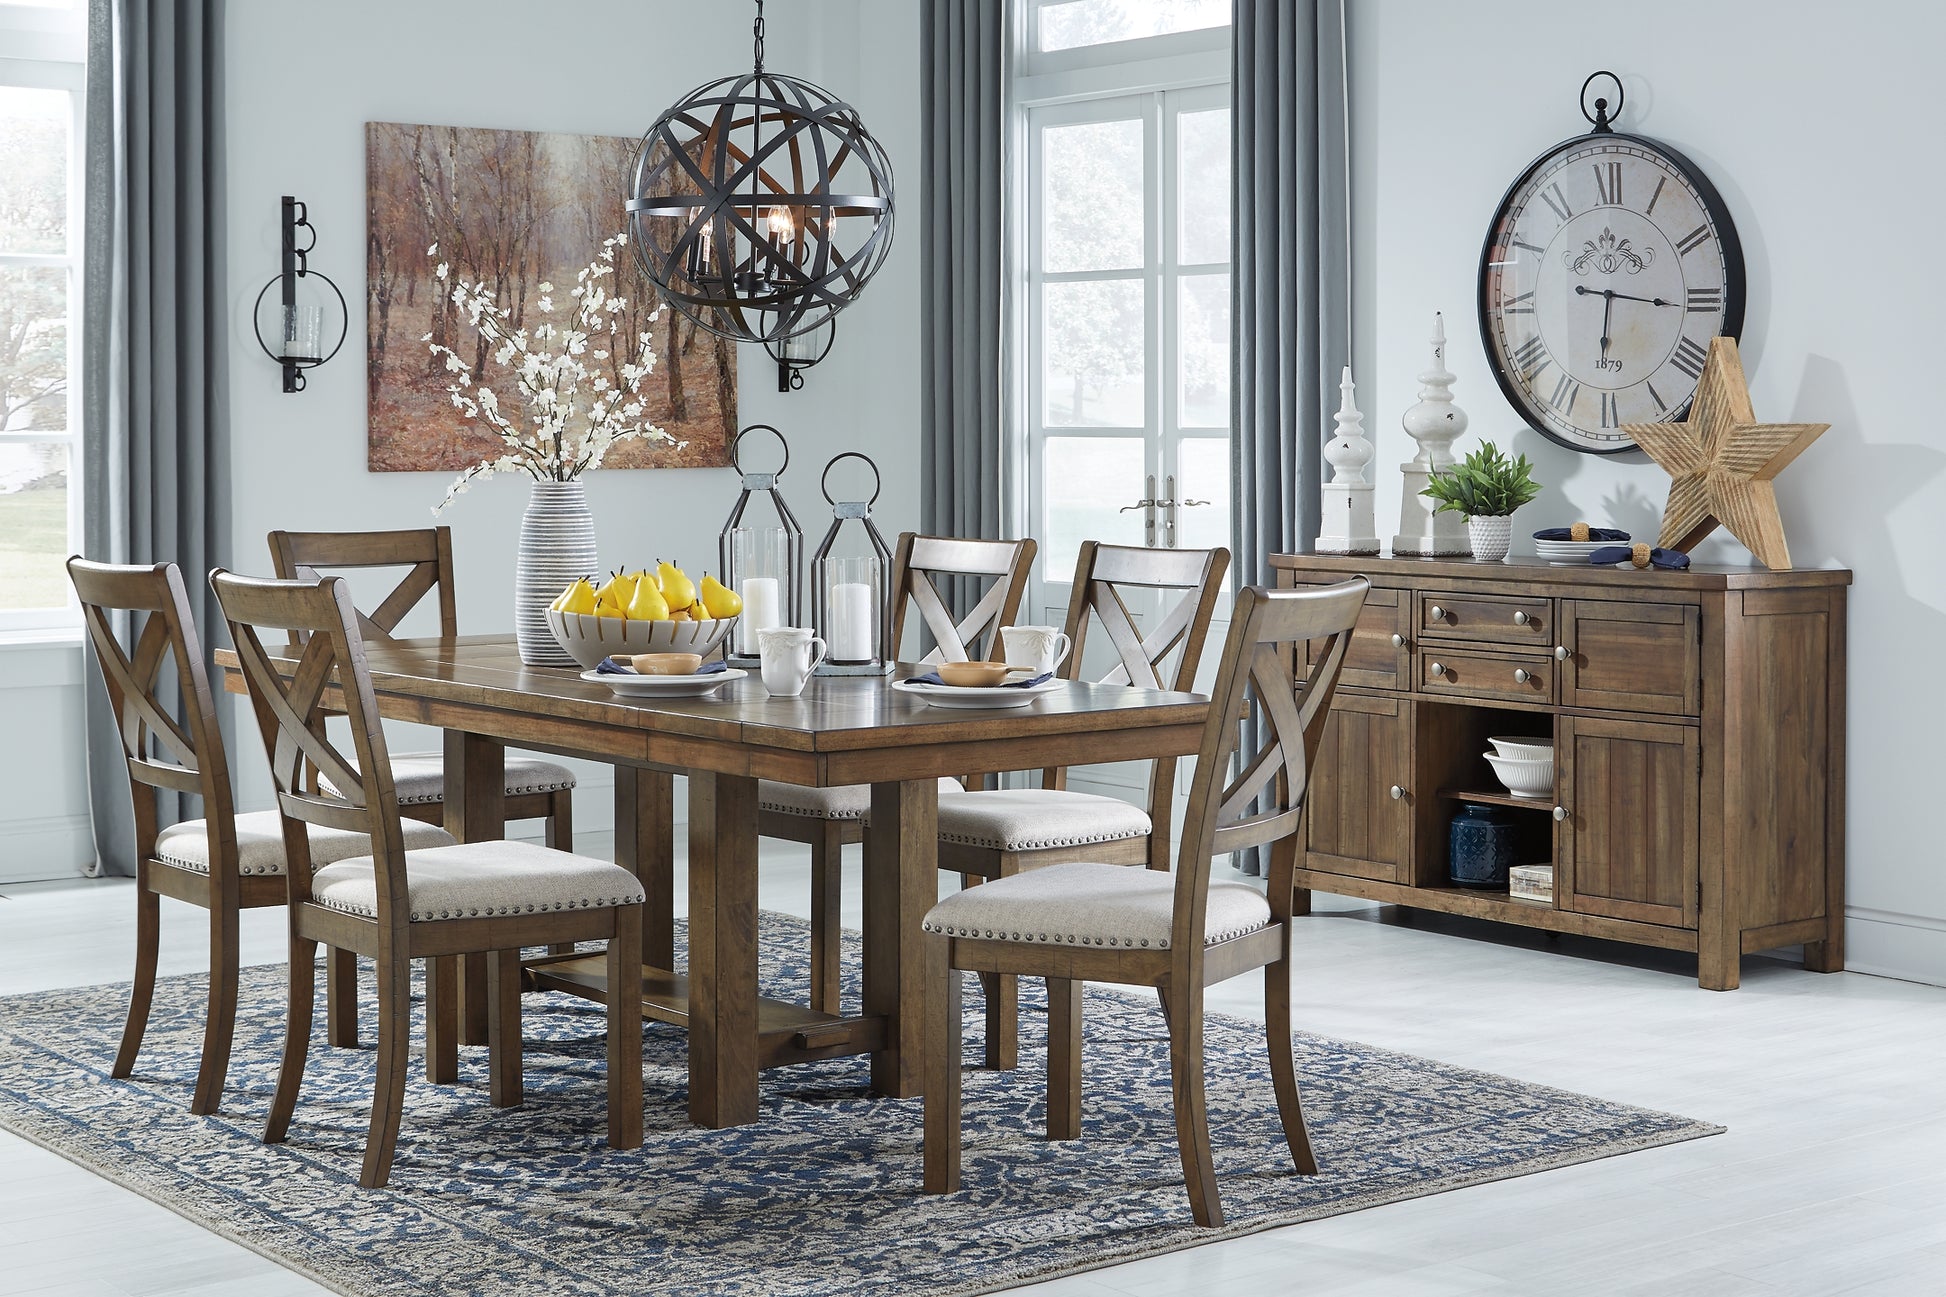 Moriville Dining Table and 6 Chairs Wilson Furniture (OH)  in Bridgeport, Ohio. Serving Bridgeport, Yorkville, Bellaire, & Avondale